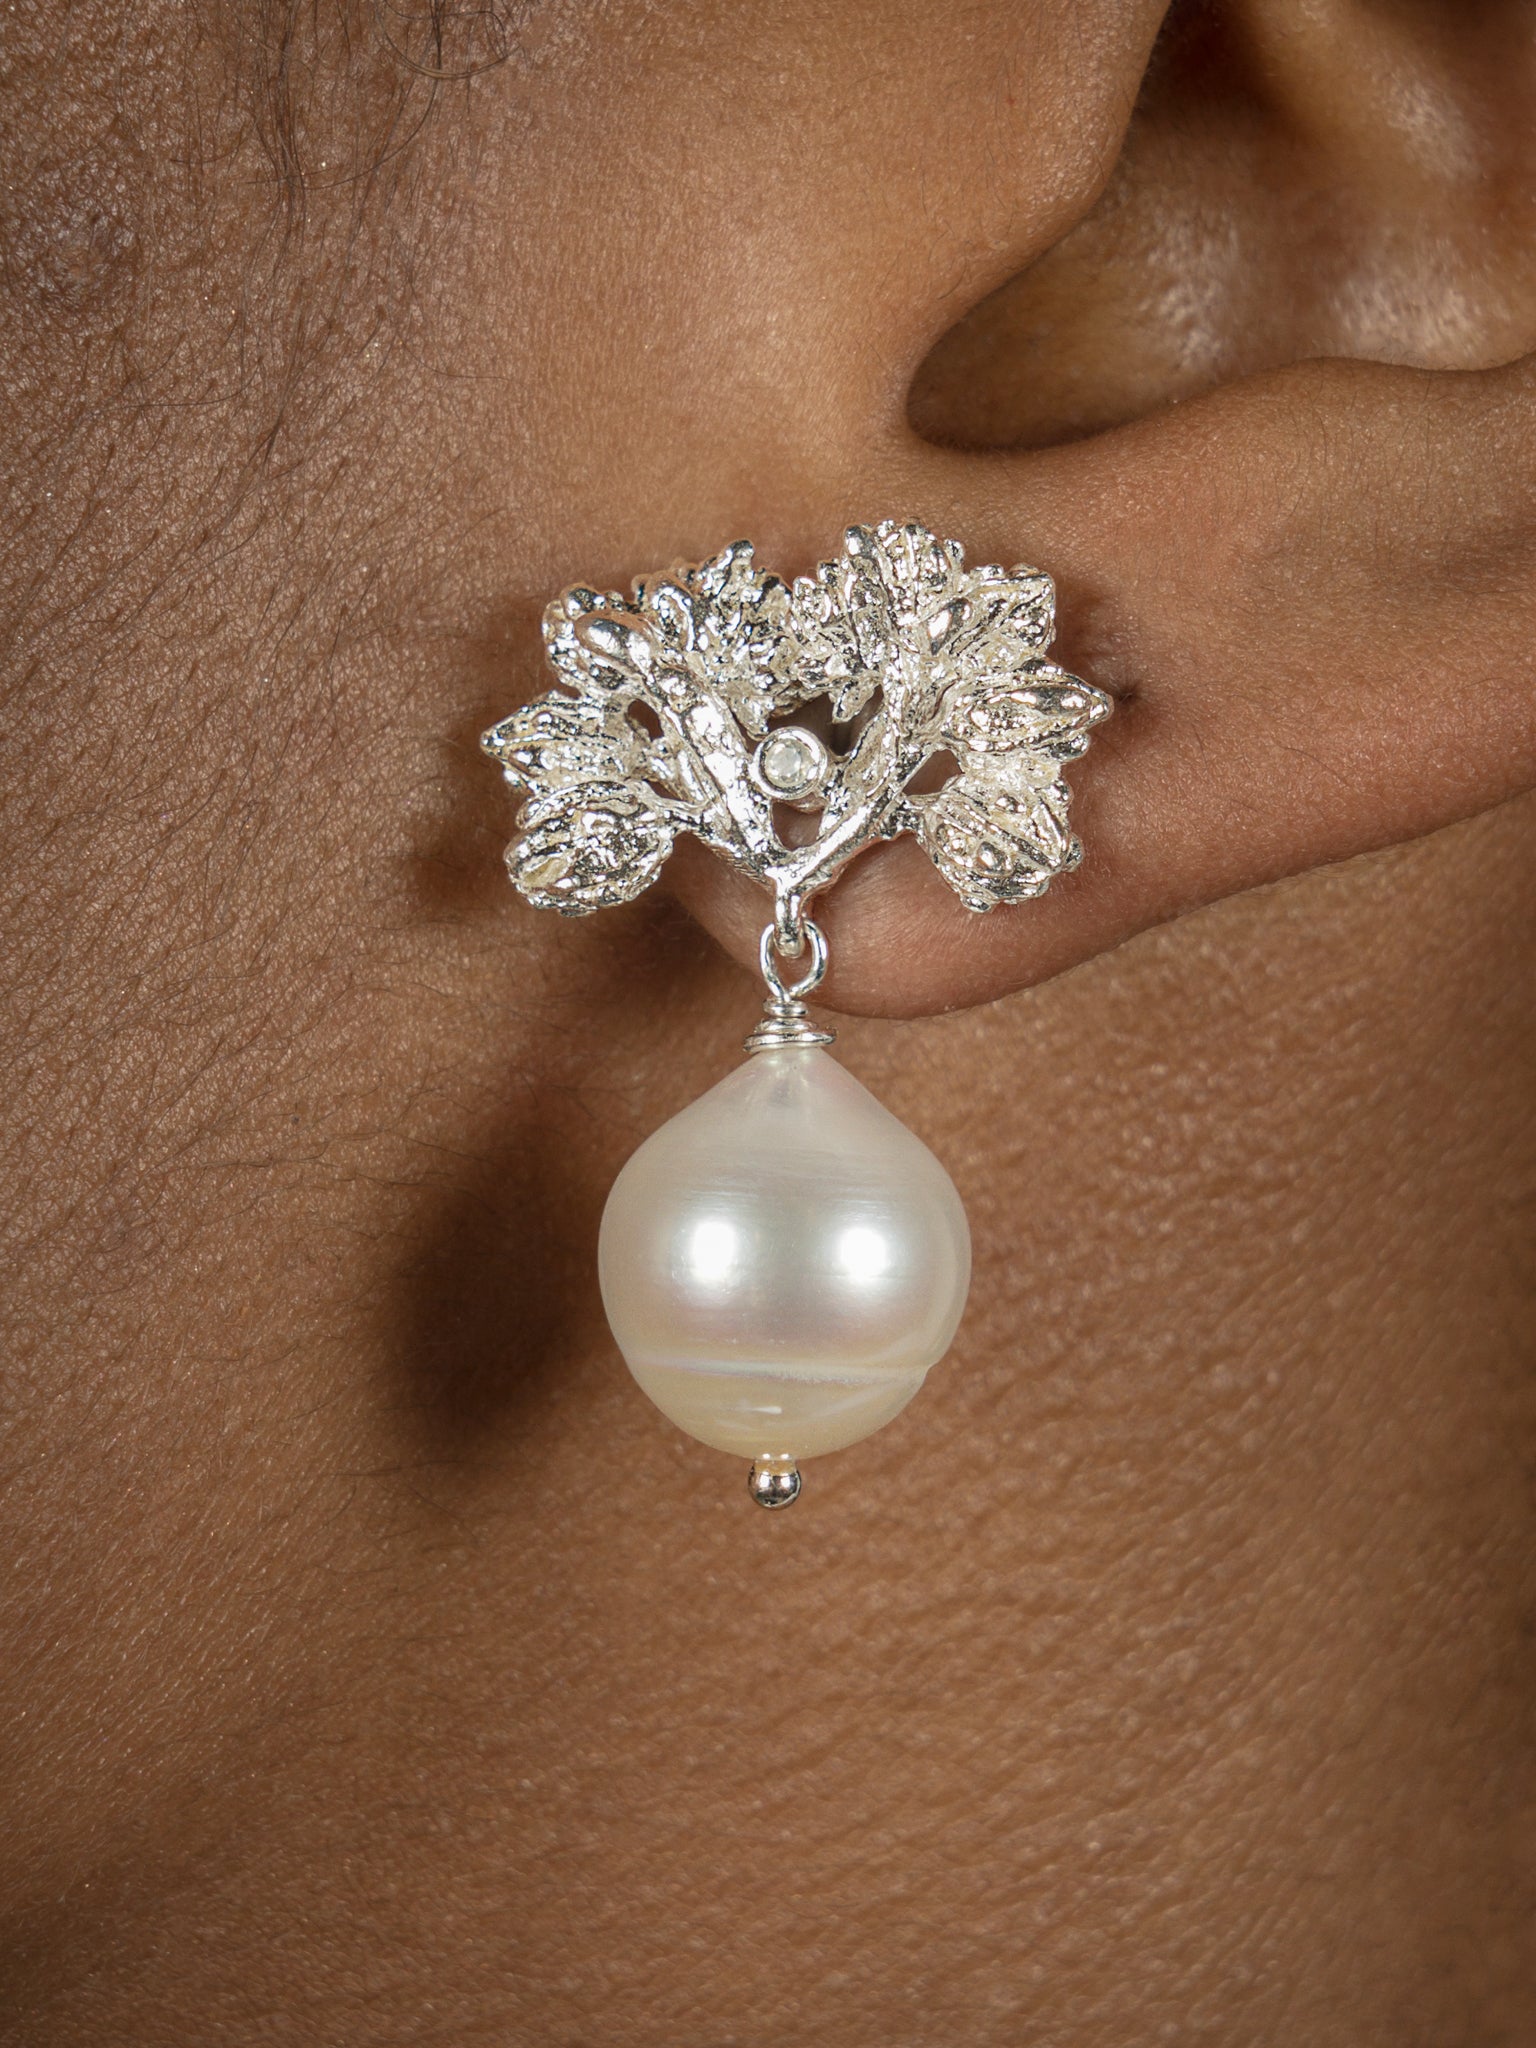 A woman's ear with a Cremilde Bispo Jewellery Pearly Forest Earrings.